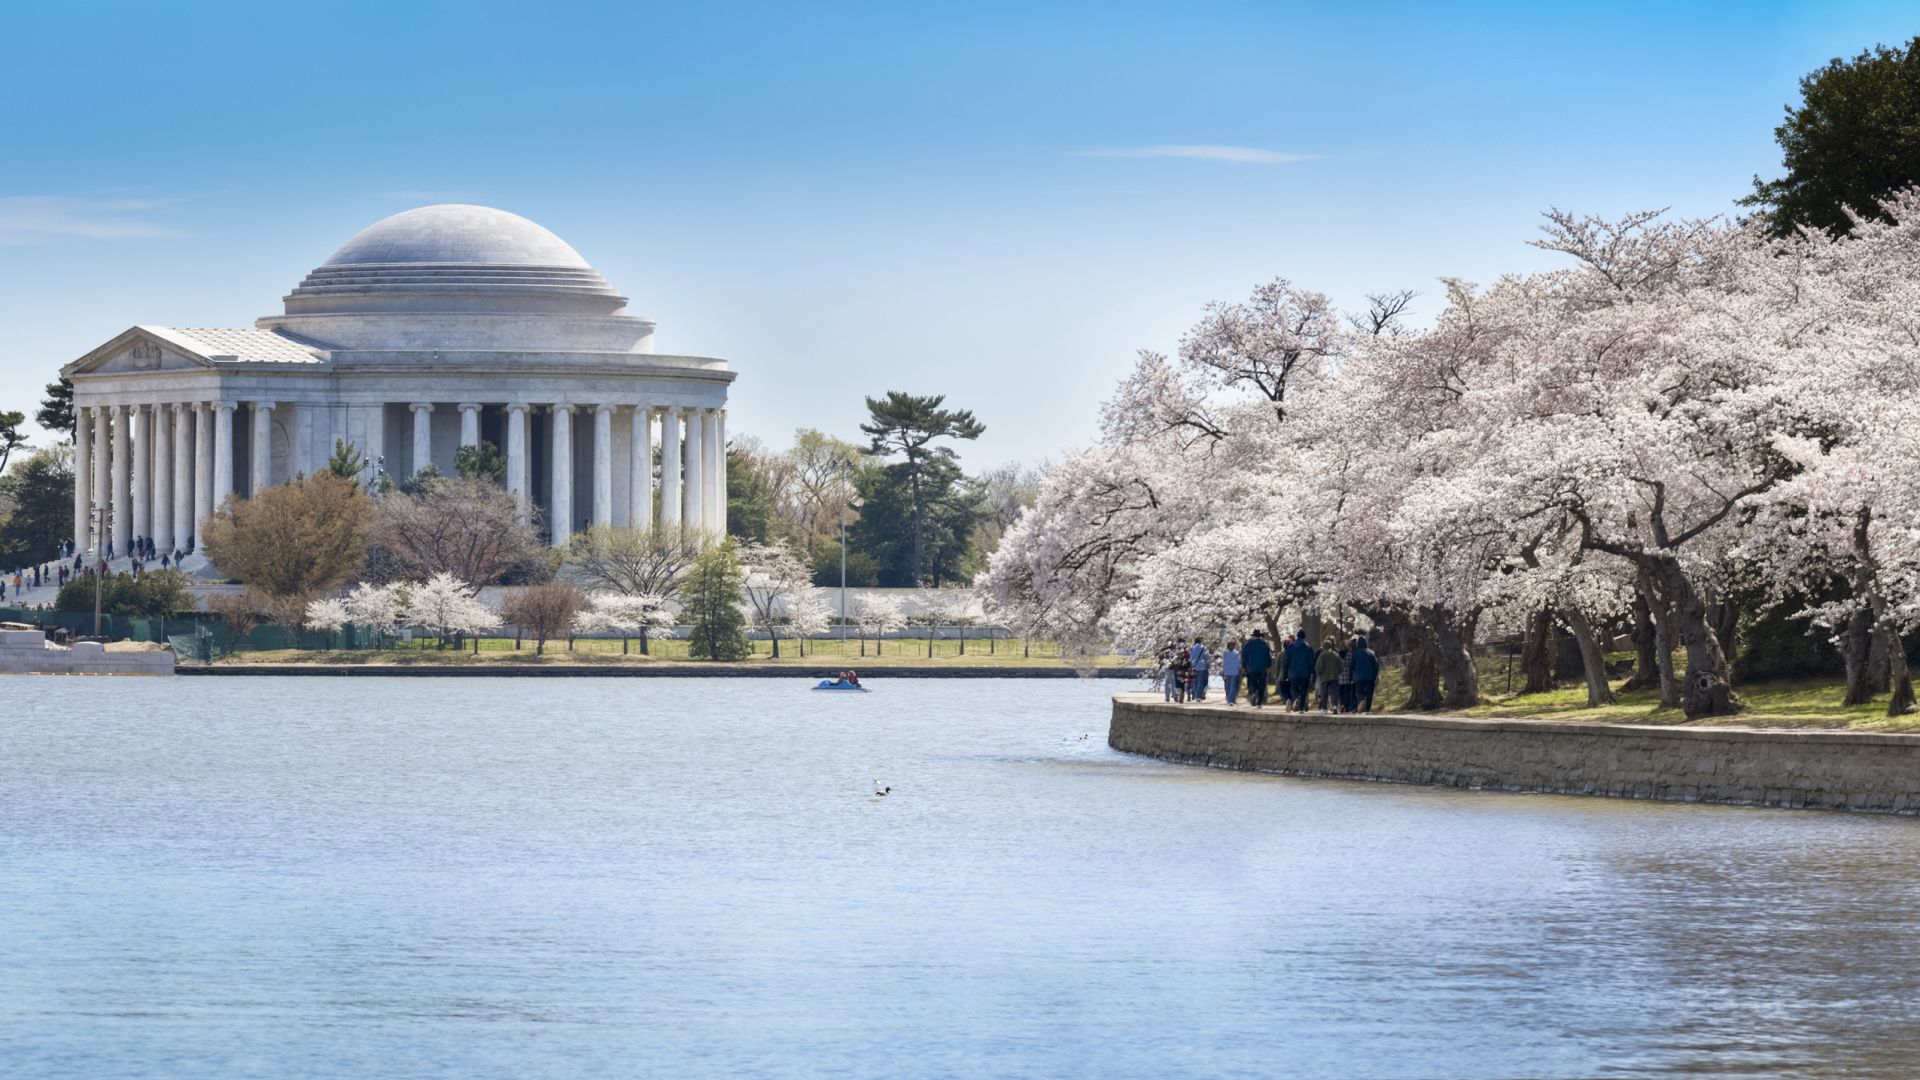 A Body Of Water With Jefferson Memorial In The Background